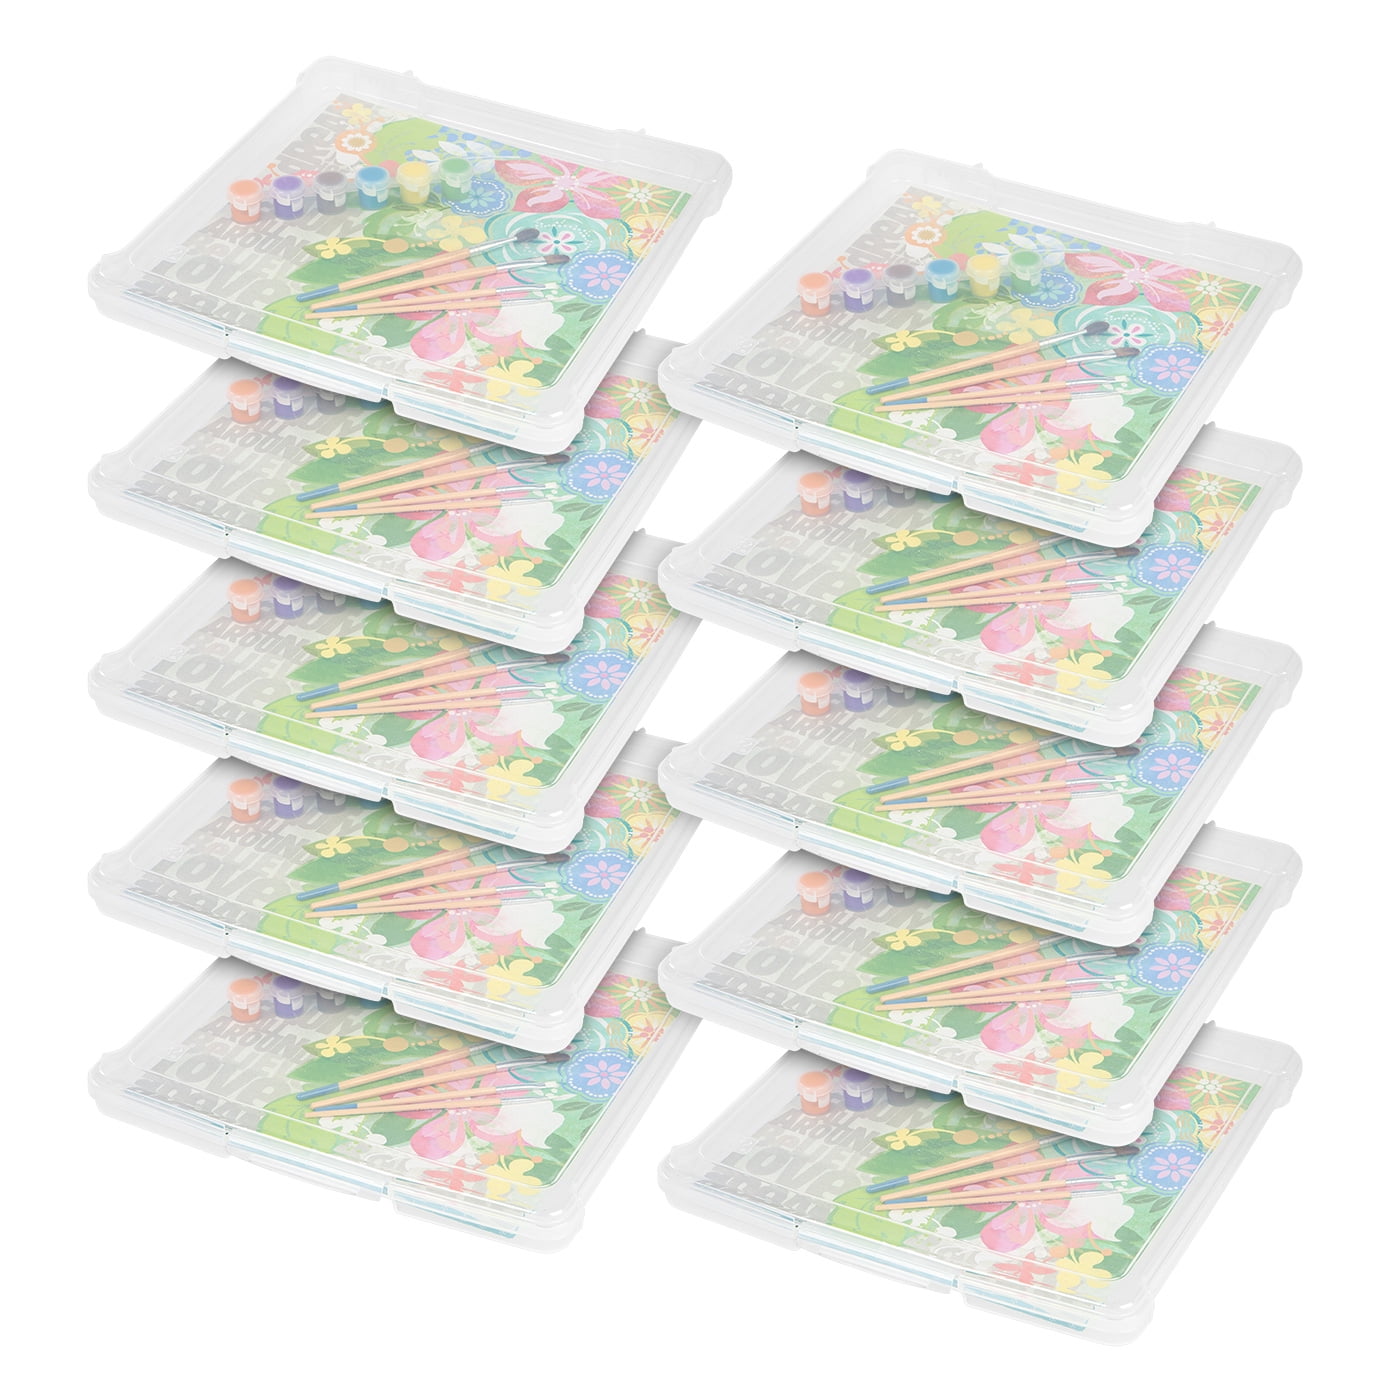 IRIS Portable Scrapbook Case for 12 x 12 Paper, 6 Pack, Clear 